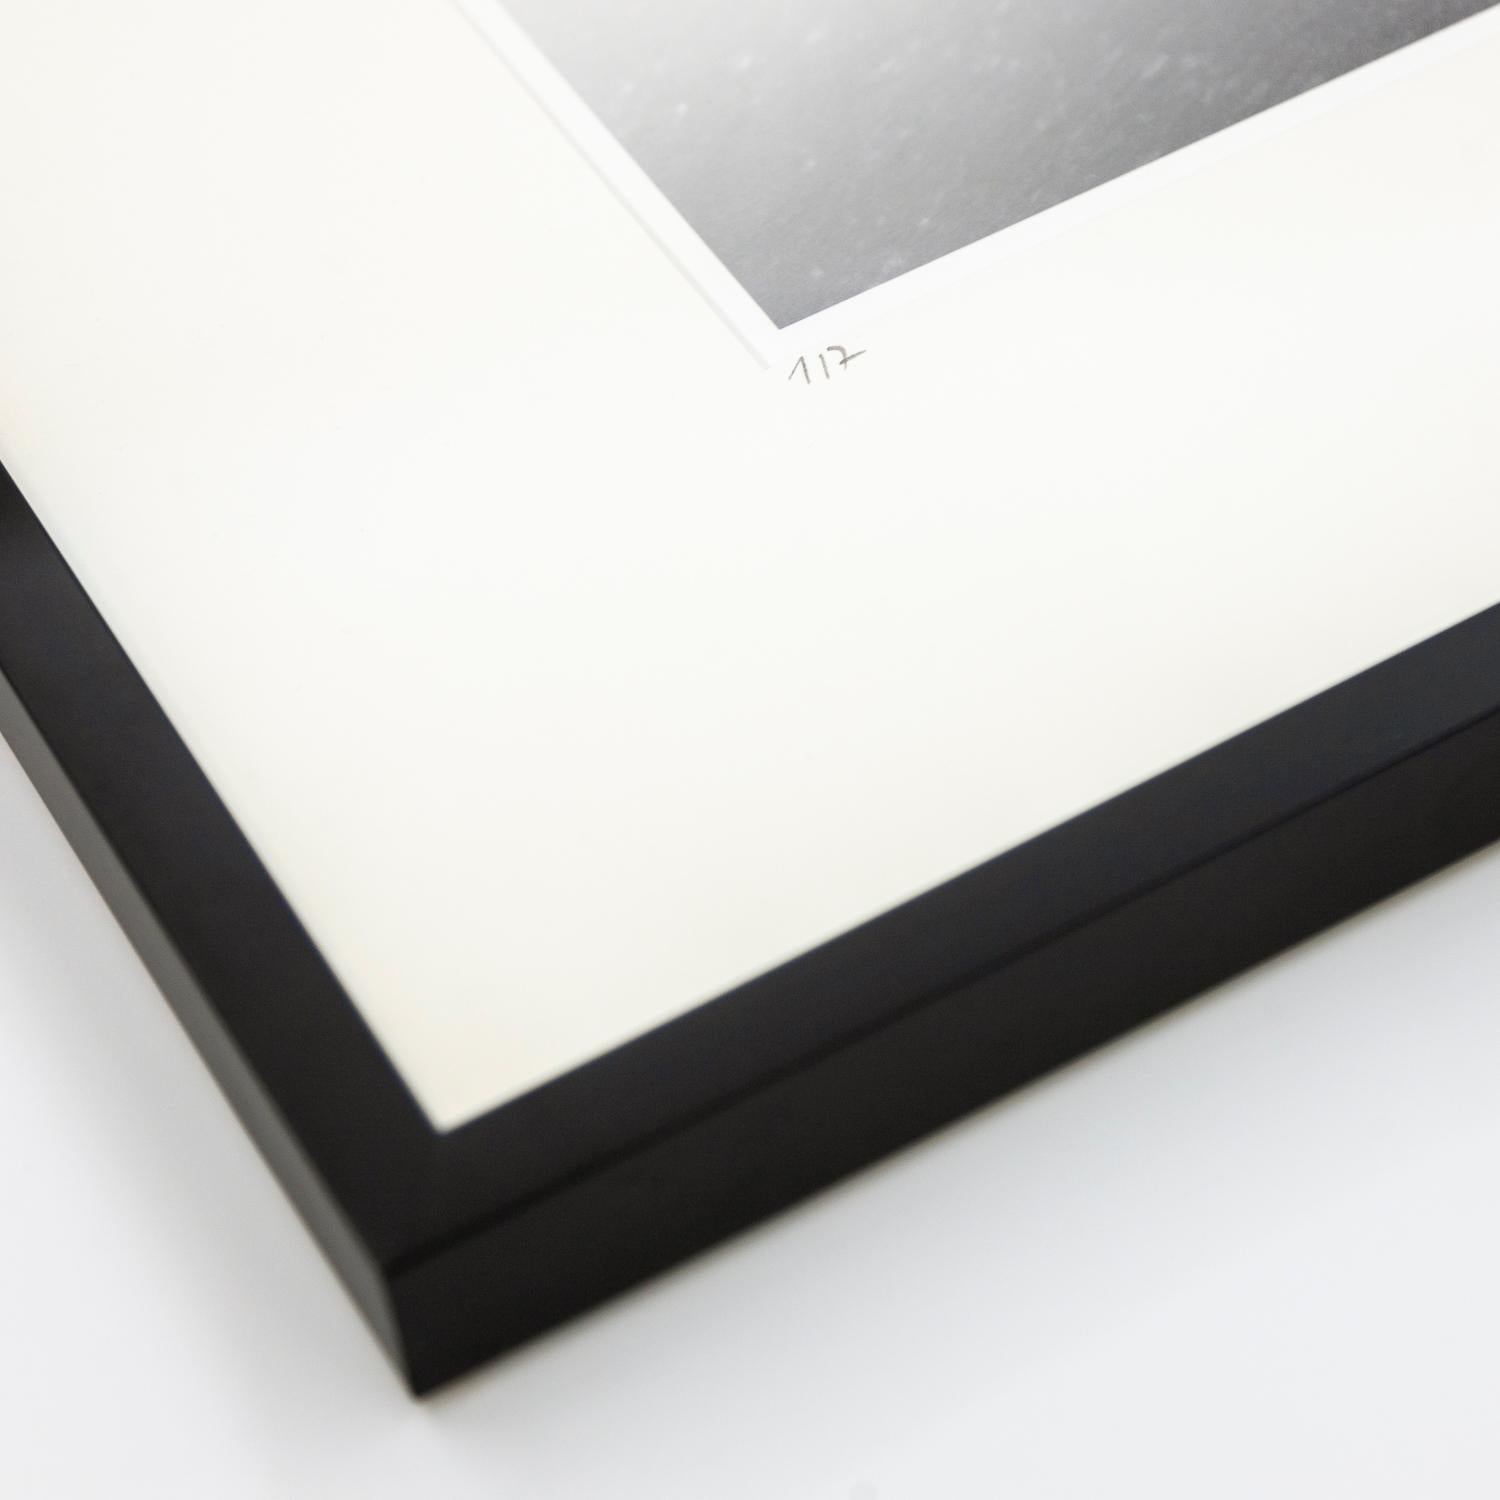 Black and white fine art photography Gerald Berghammer. Archival Pigment Ink Print, Printed 2022. Limited Edition 1/7. Signed, numbered, dated by Artis. Handmade wood frame, black, natural white archival Passepartout, anti-reflection white glass, UV